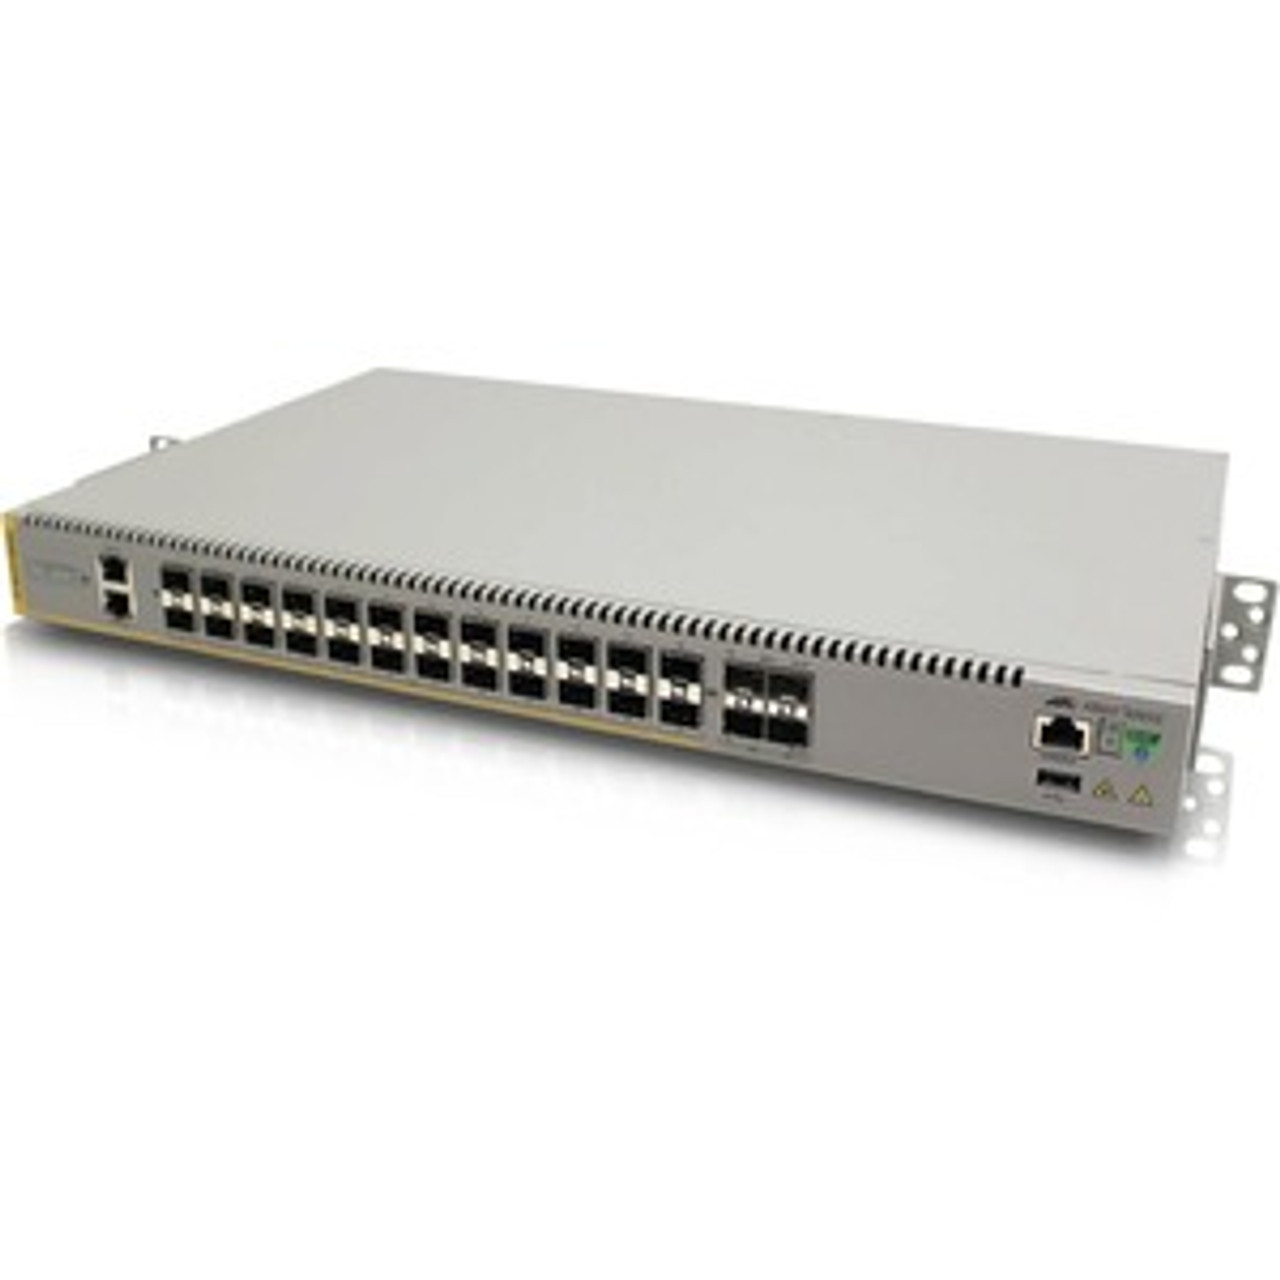 24x 100/1000X SFP, 4x 1/10G SFP+, Industrial Ethernet, Stackable Layer 3 Switch